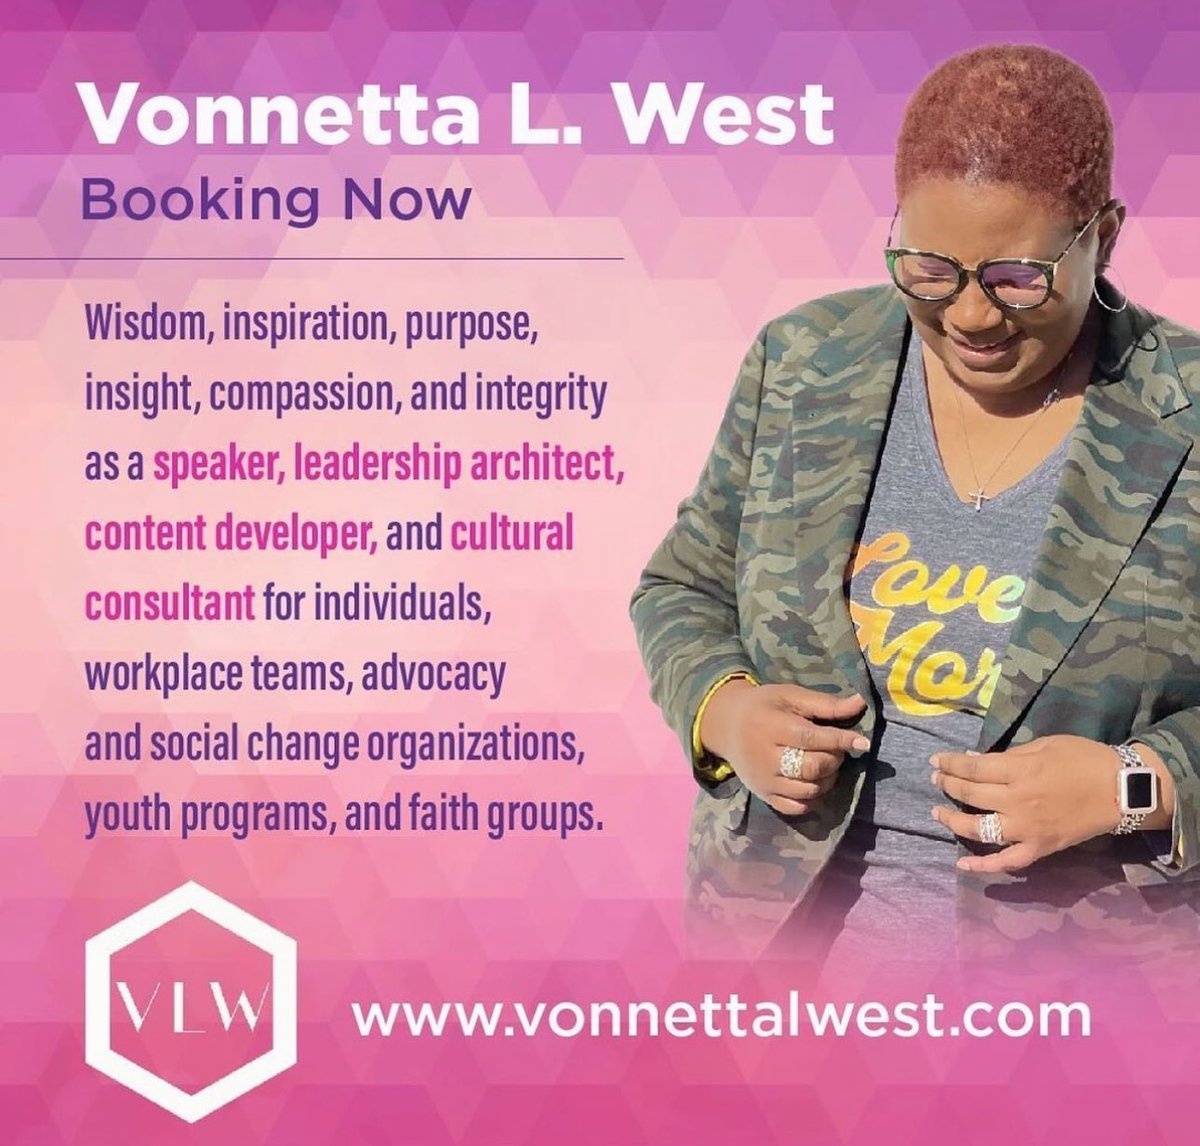 Booking now. Let’s create, lead, and grow together: vonnettalwest.com #speaker #leadership #consultant #content #culture #workplace #advocacy #socialchange #youth #honor